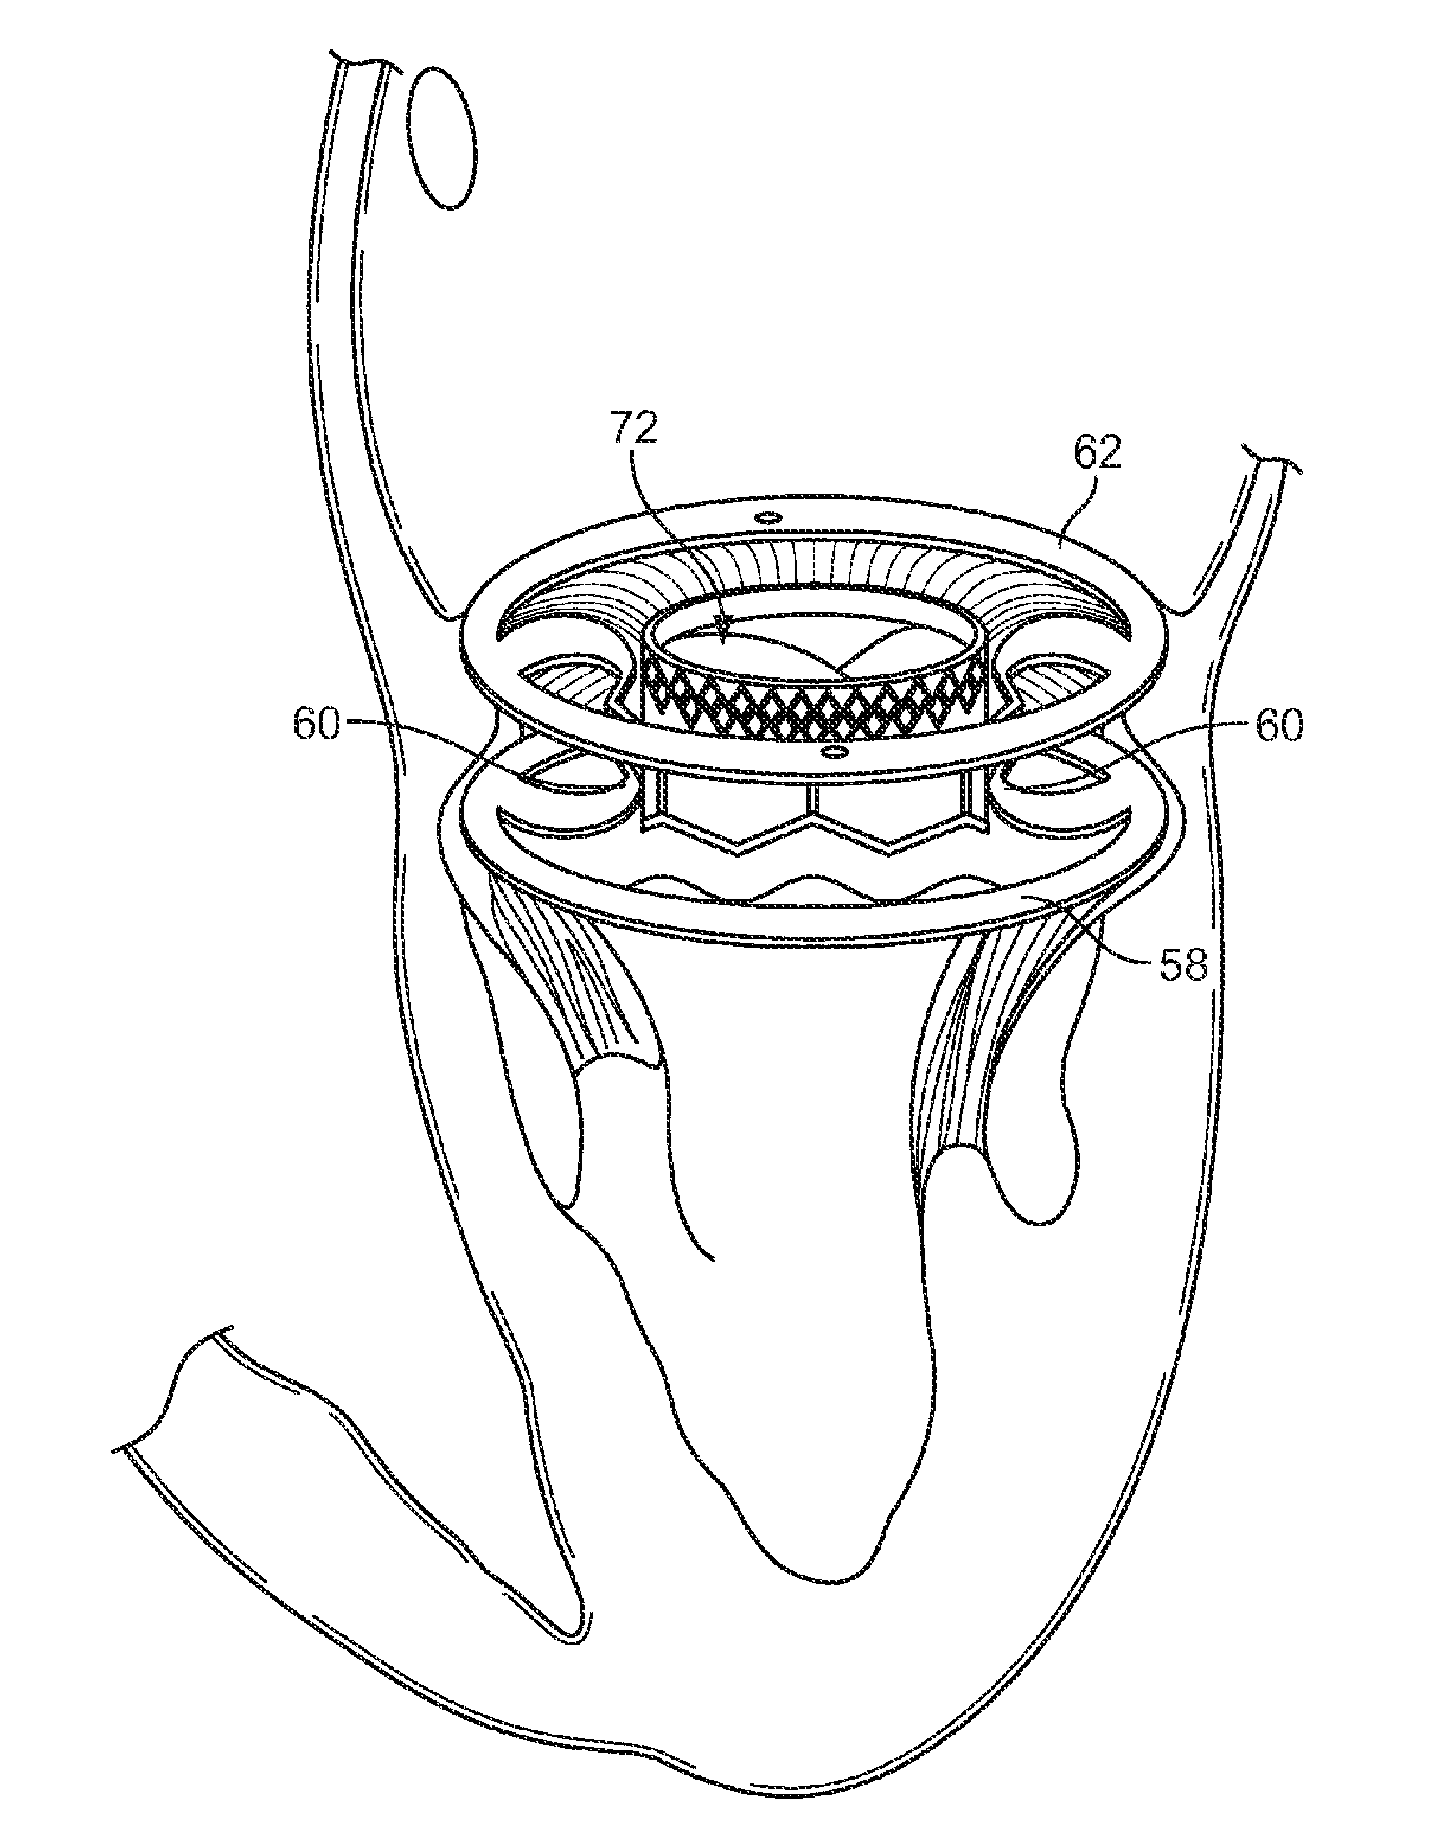 Cardiac valve support structure